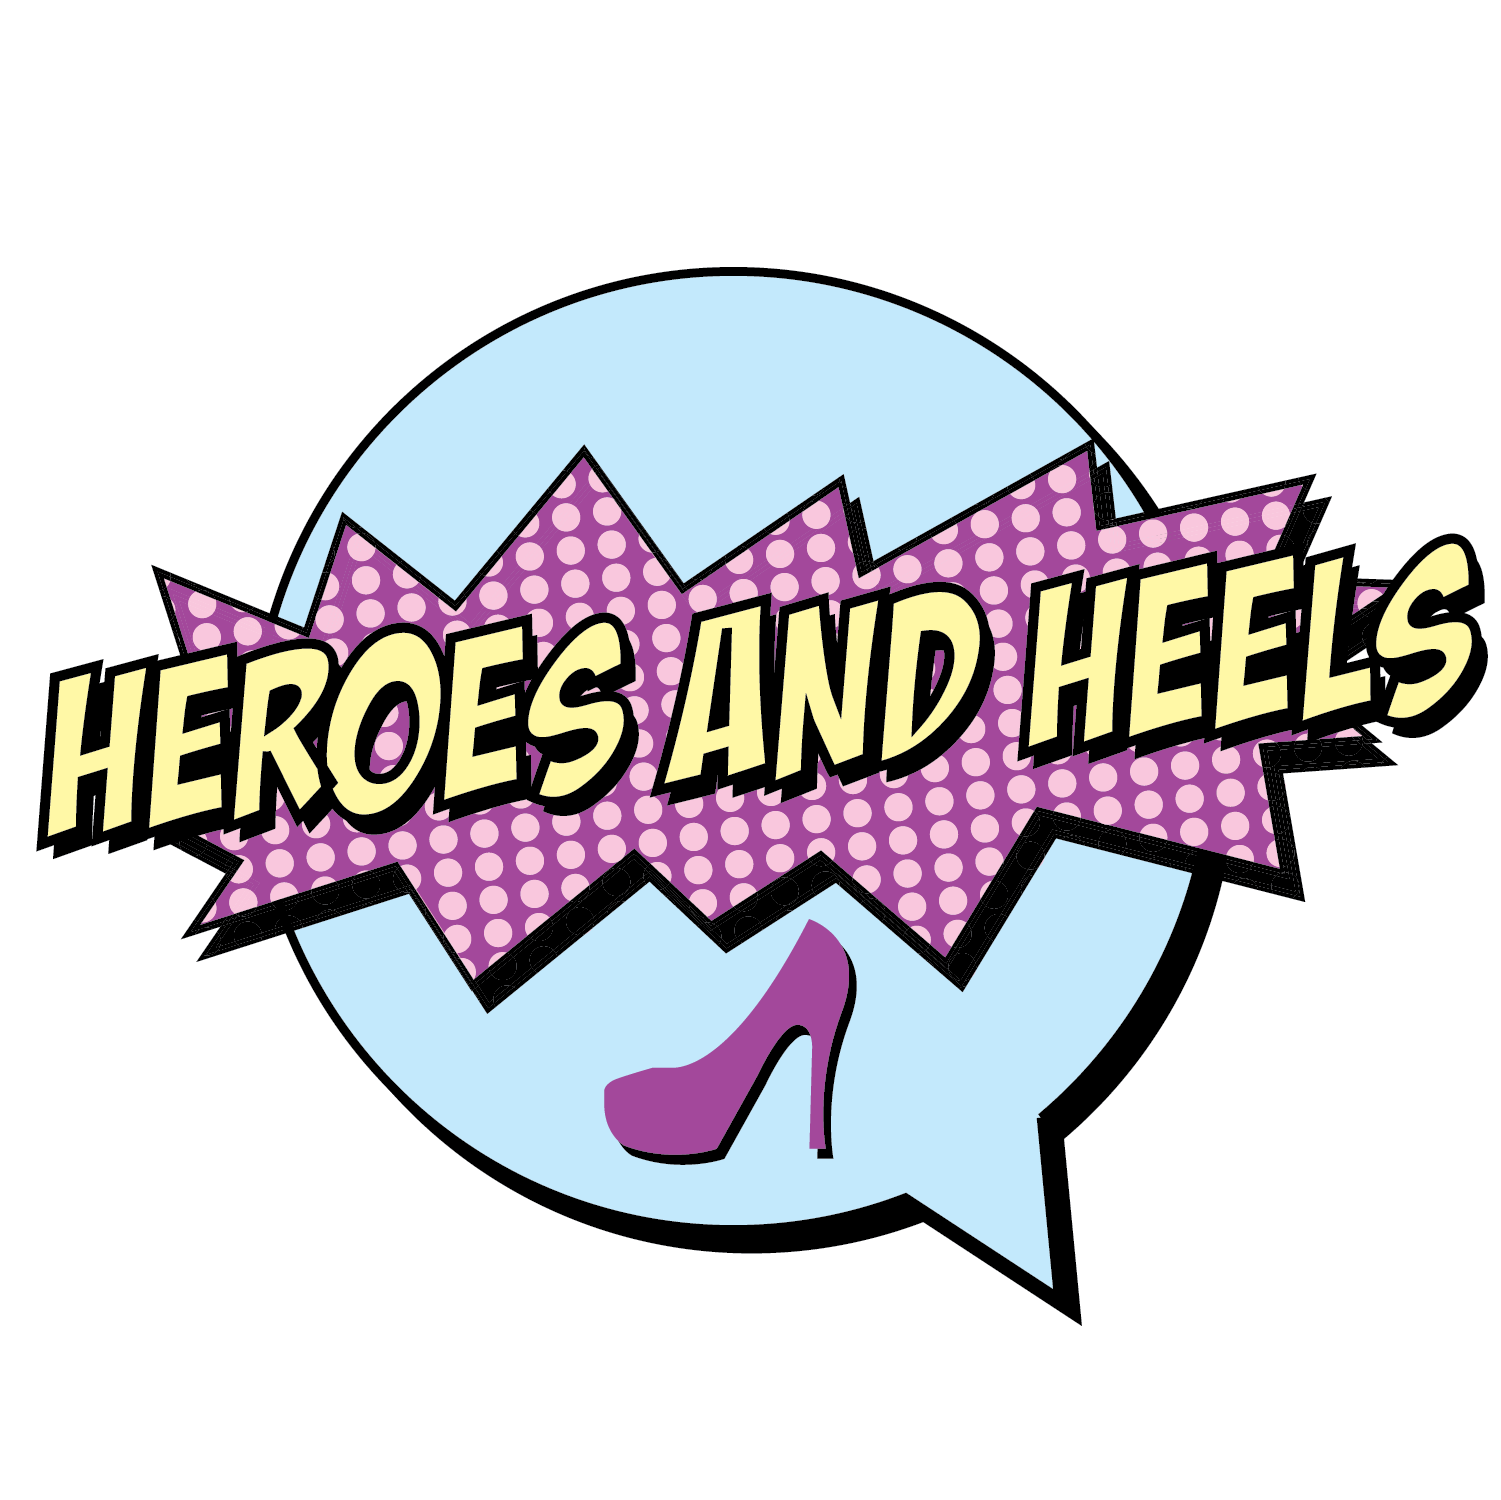 Heroes and Heels on Twitter "Check out these fierce storm boots we